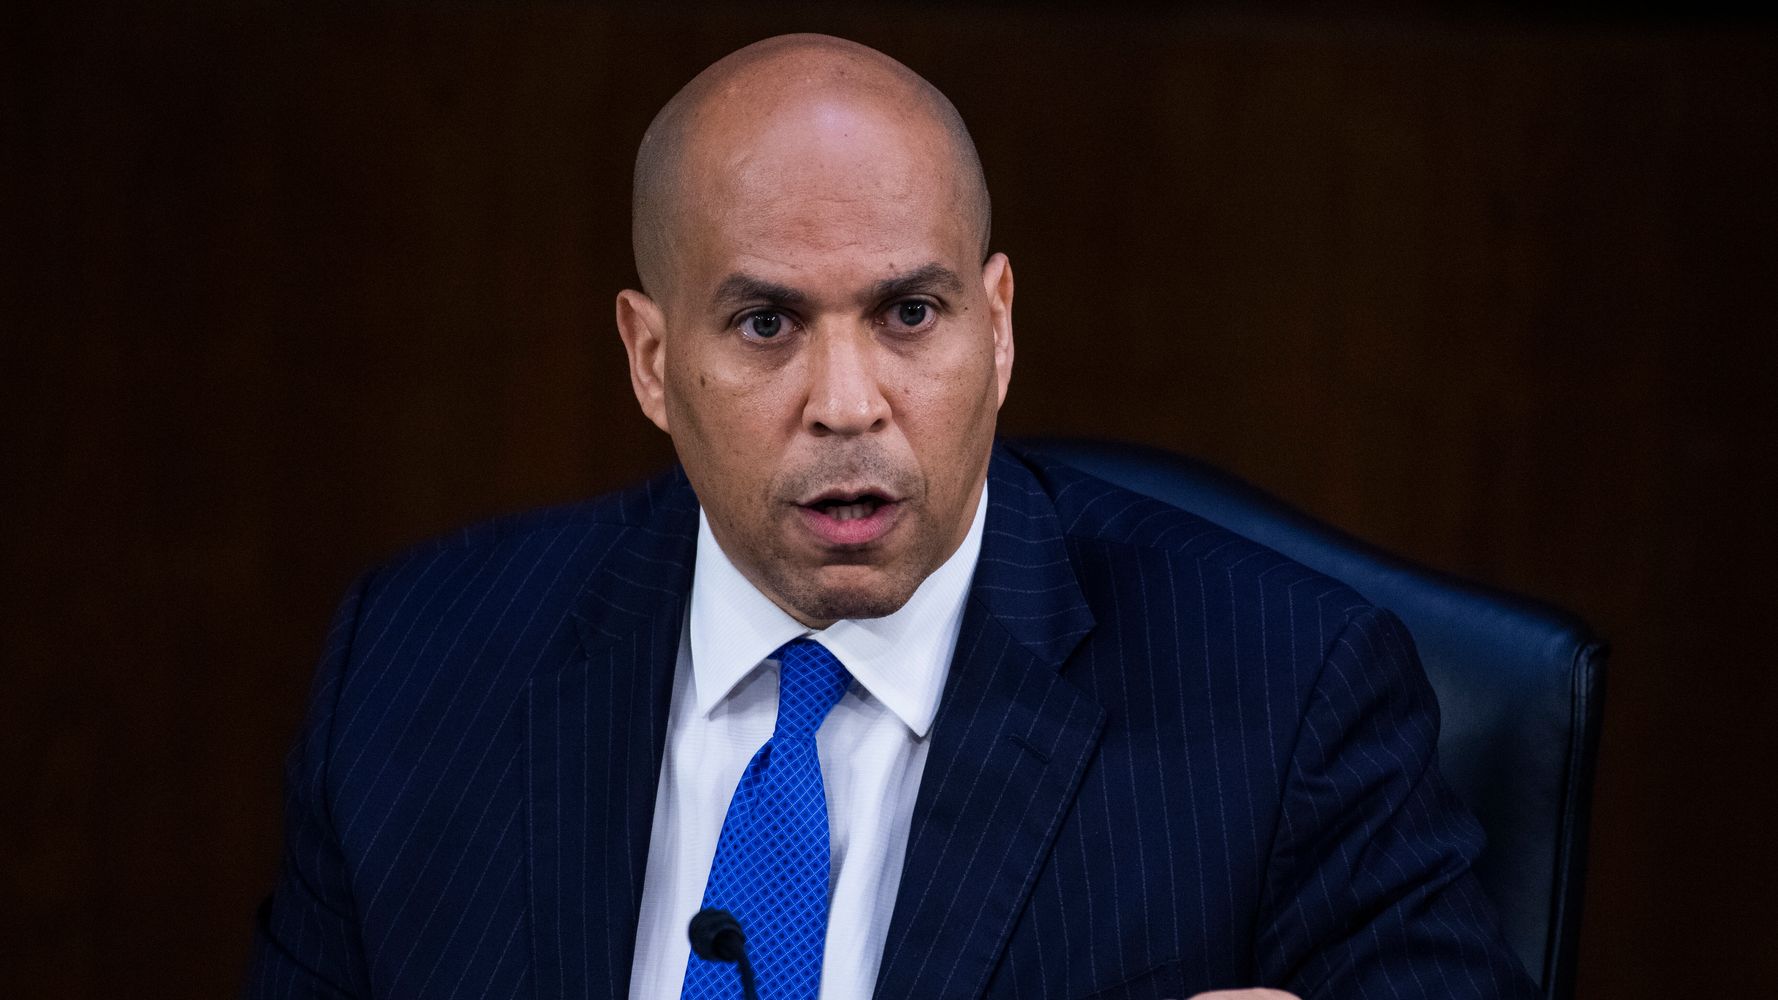 Cory Booker Slams ‘Racist’ House GOP Candidate Madison Cawthorn